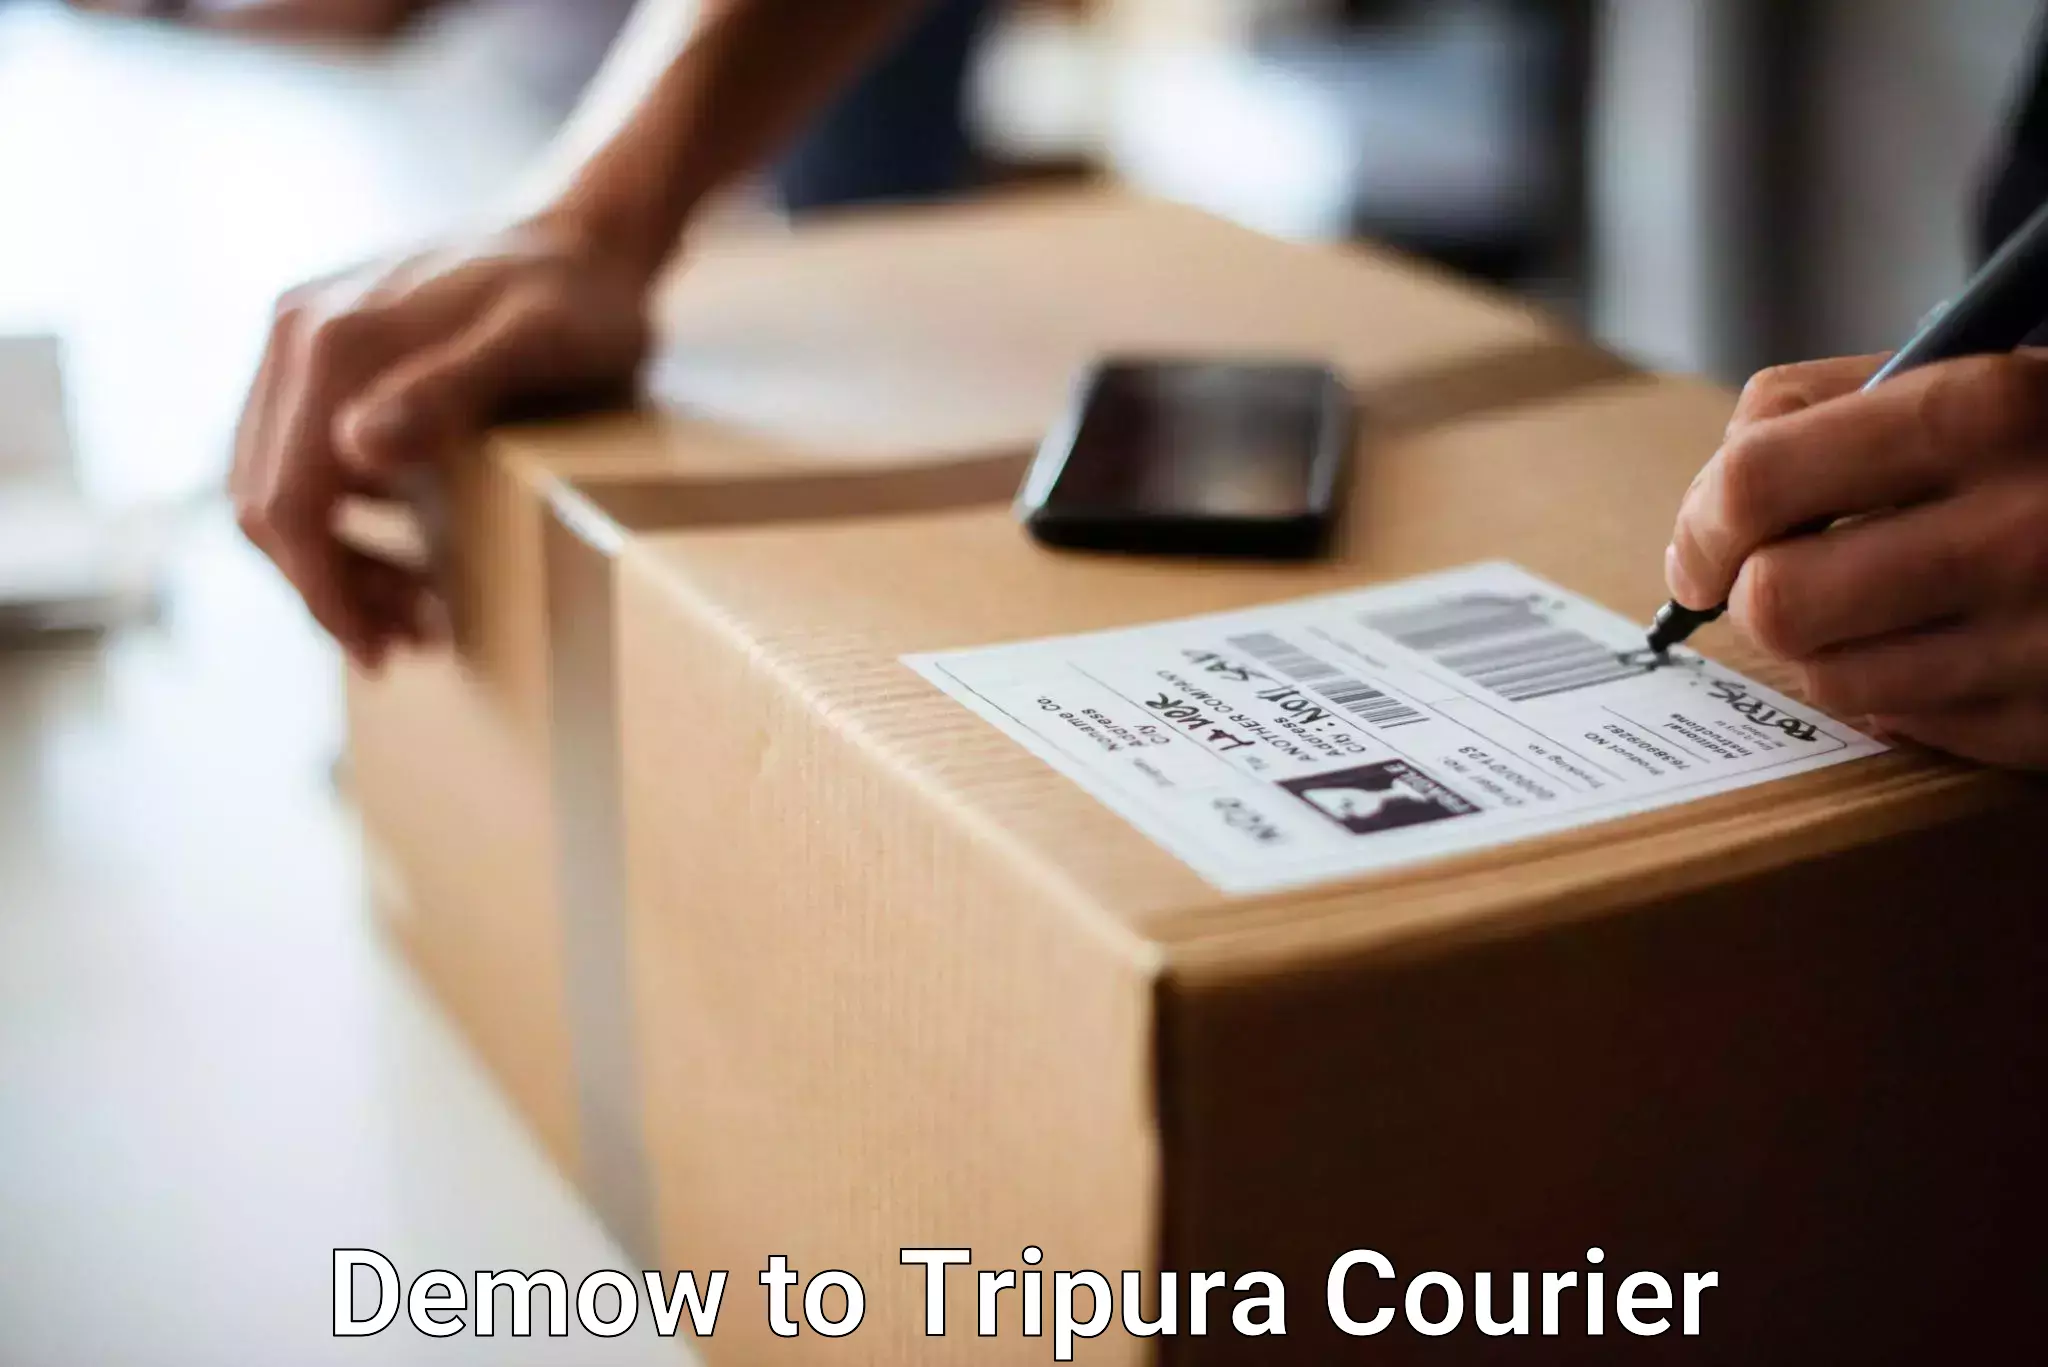 Luggage delivery app Demow to Tripura